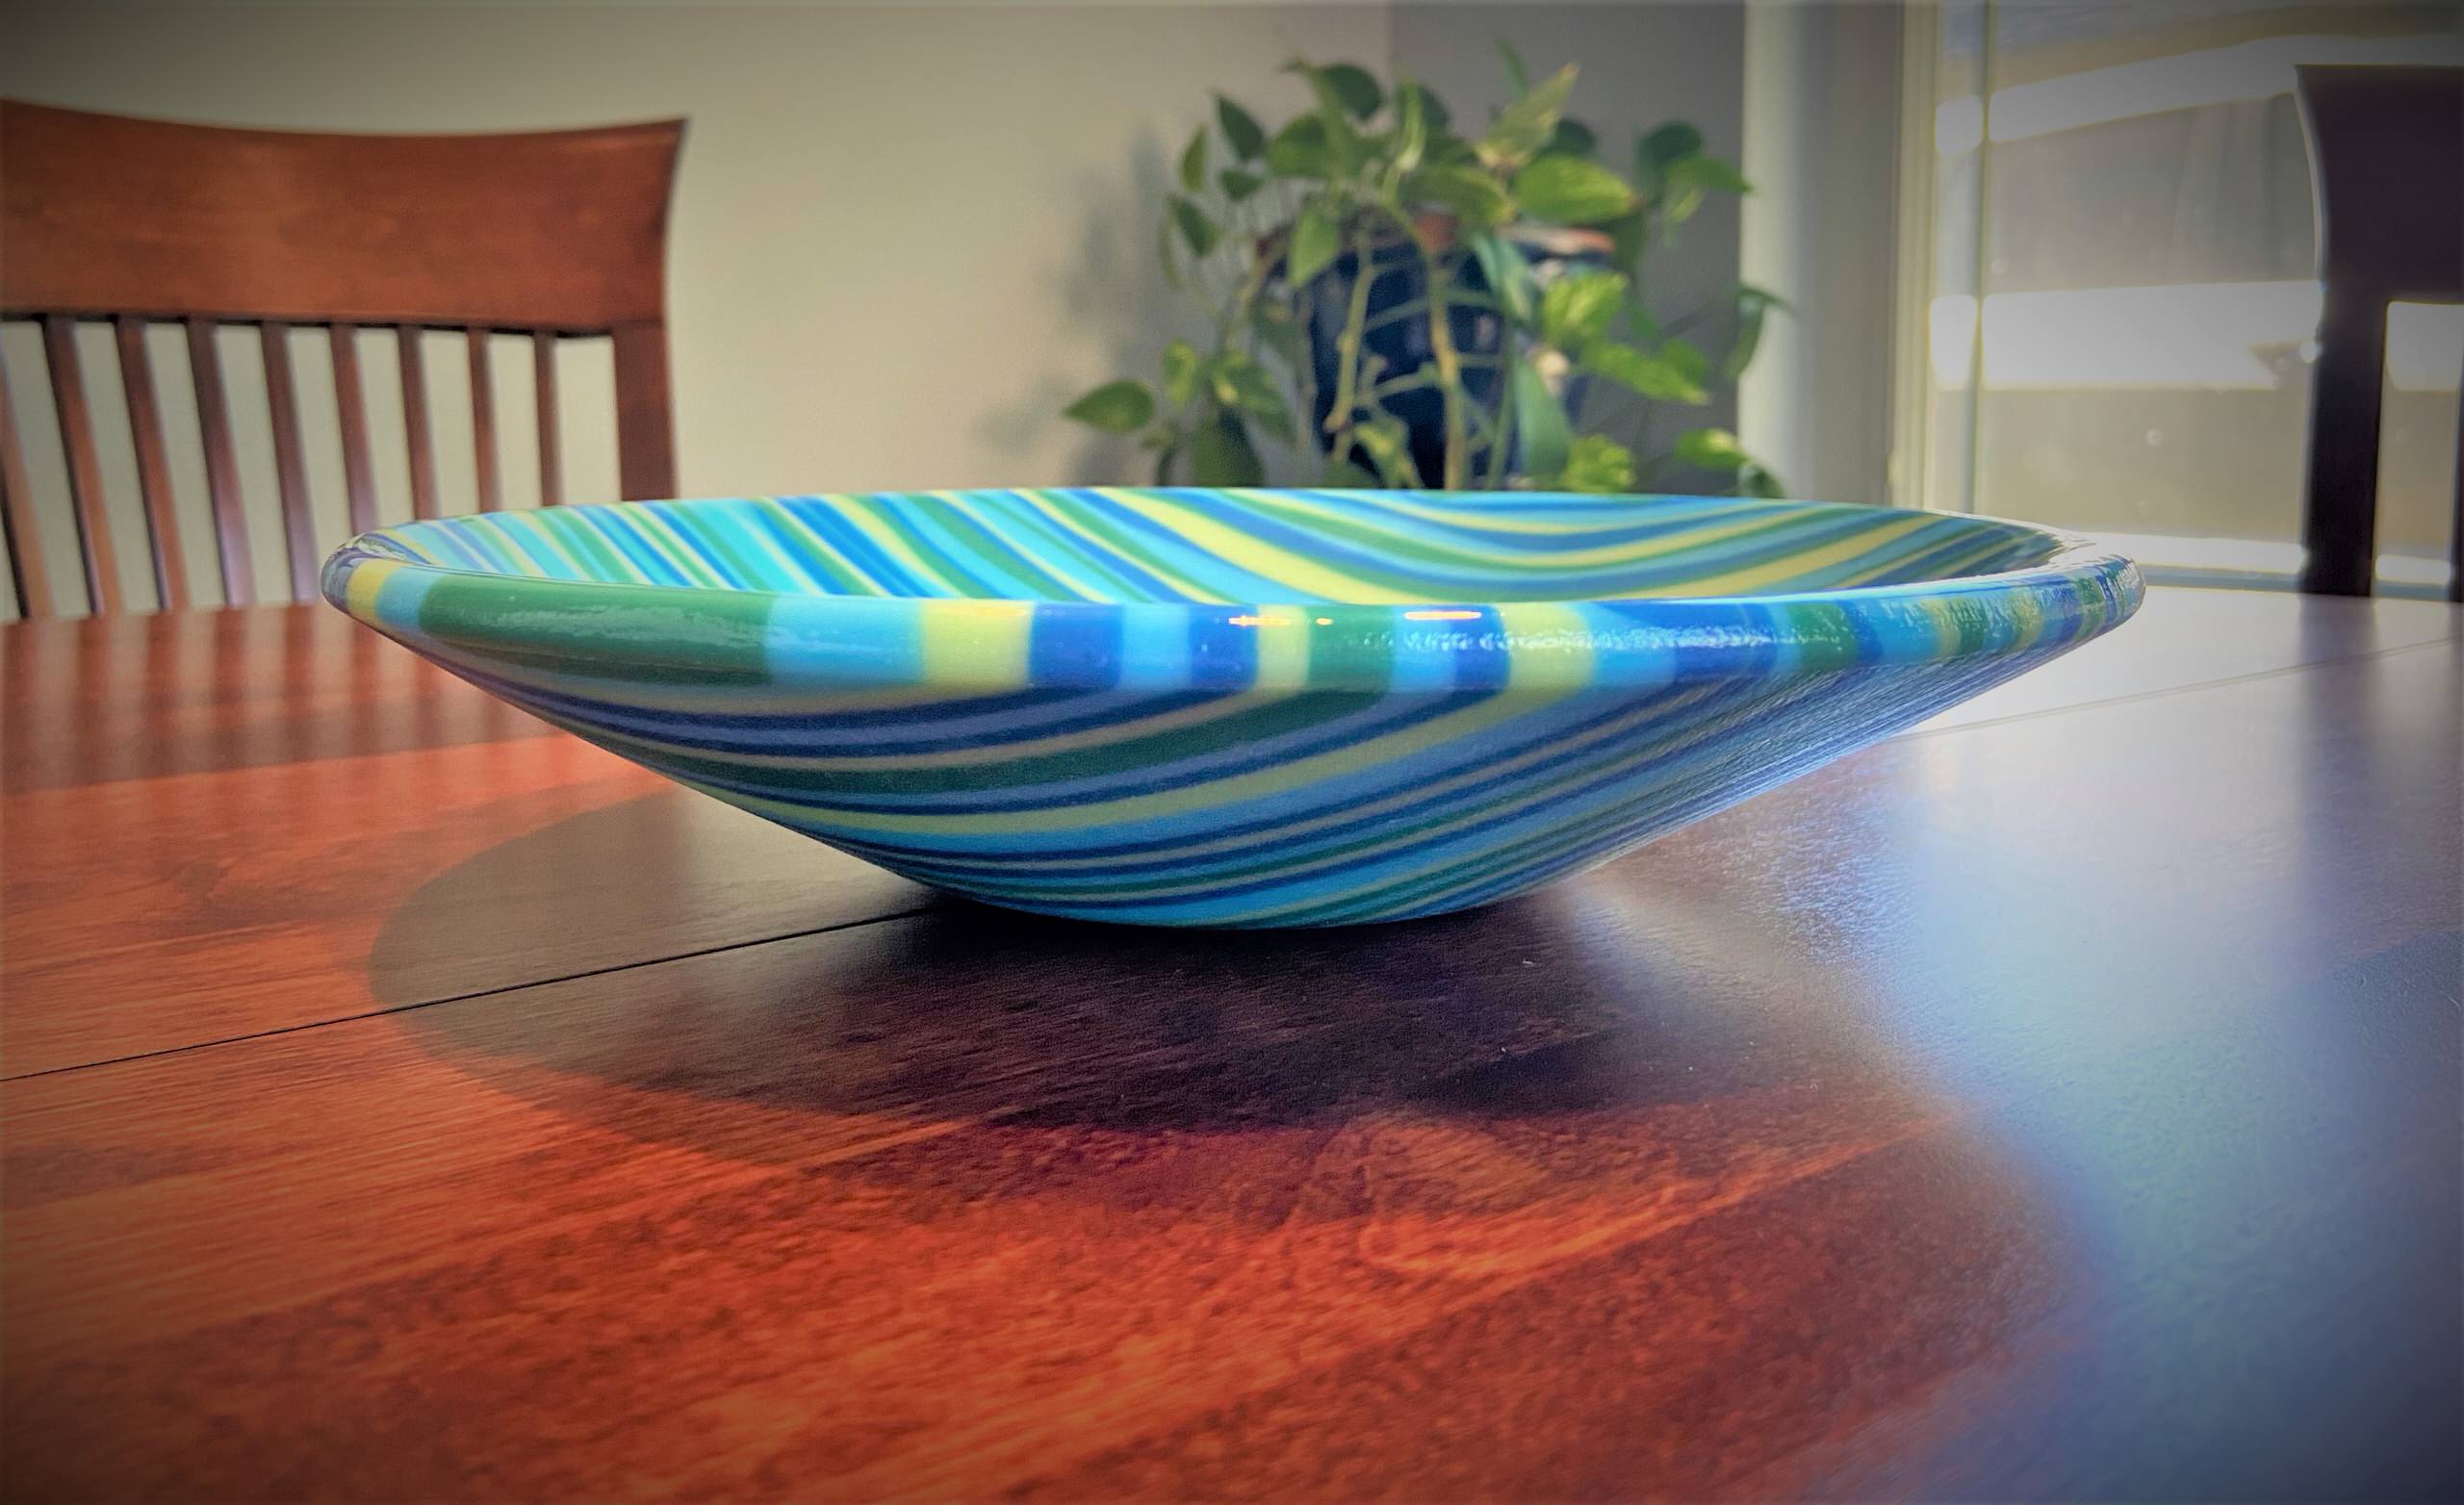 9" Blue/Turquoise/Green Serving Bowl